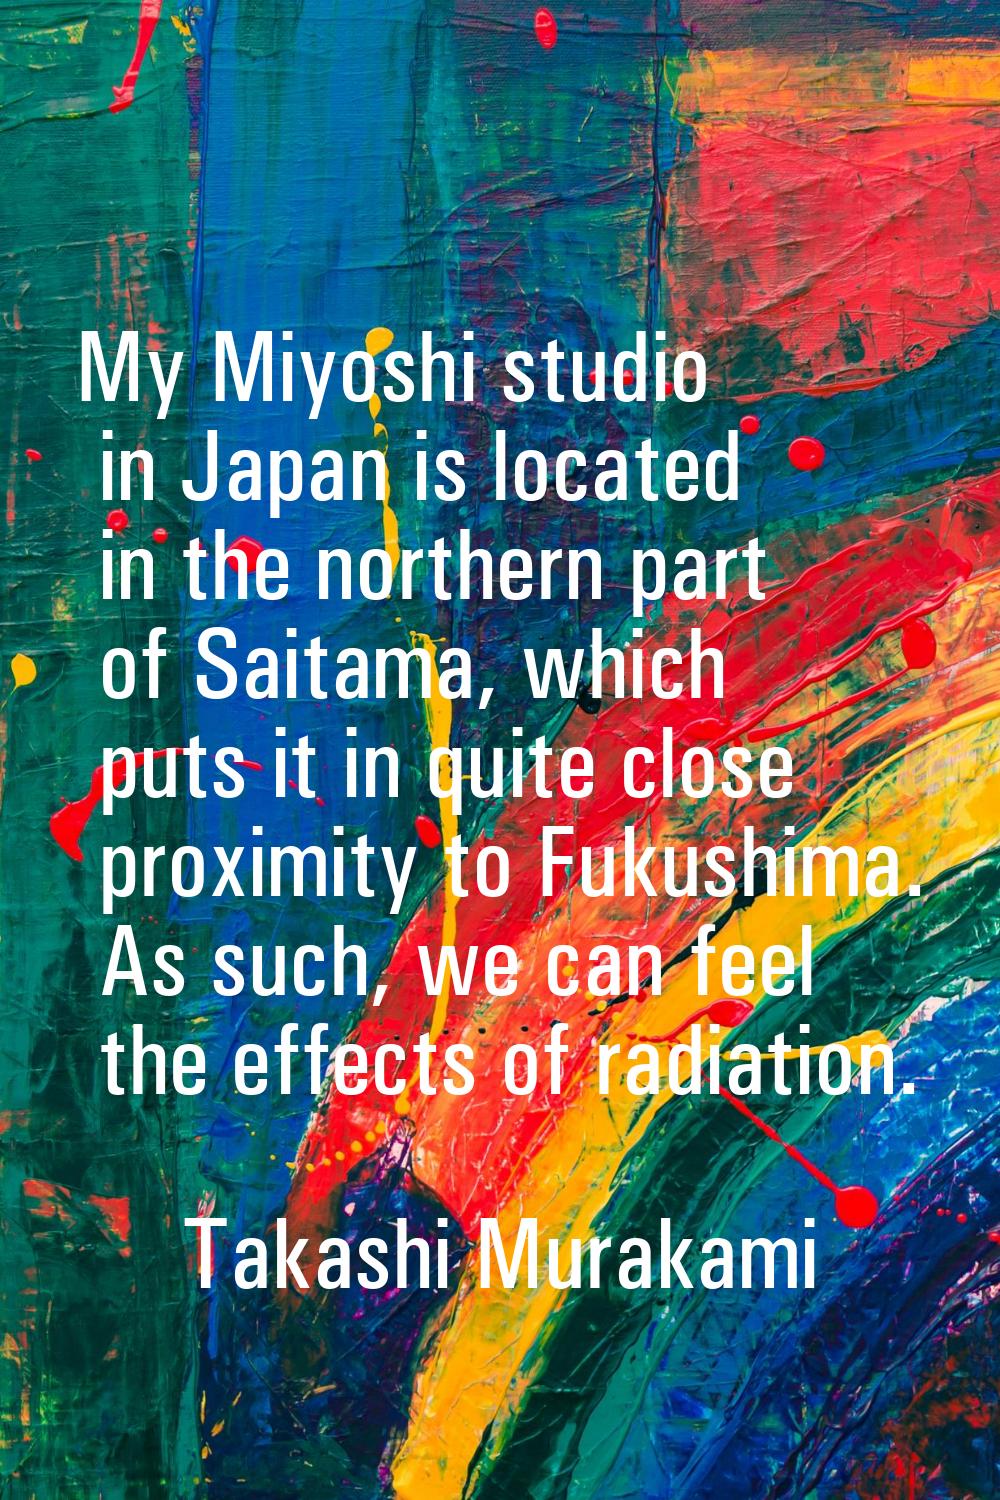 My Miyoshi studio in Japan is located in the northern part of Saitama, which puts it in quite close